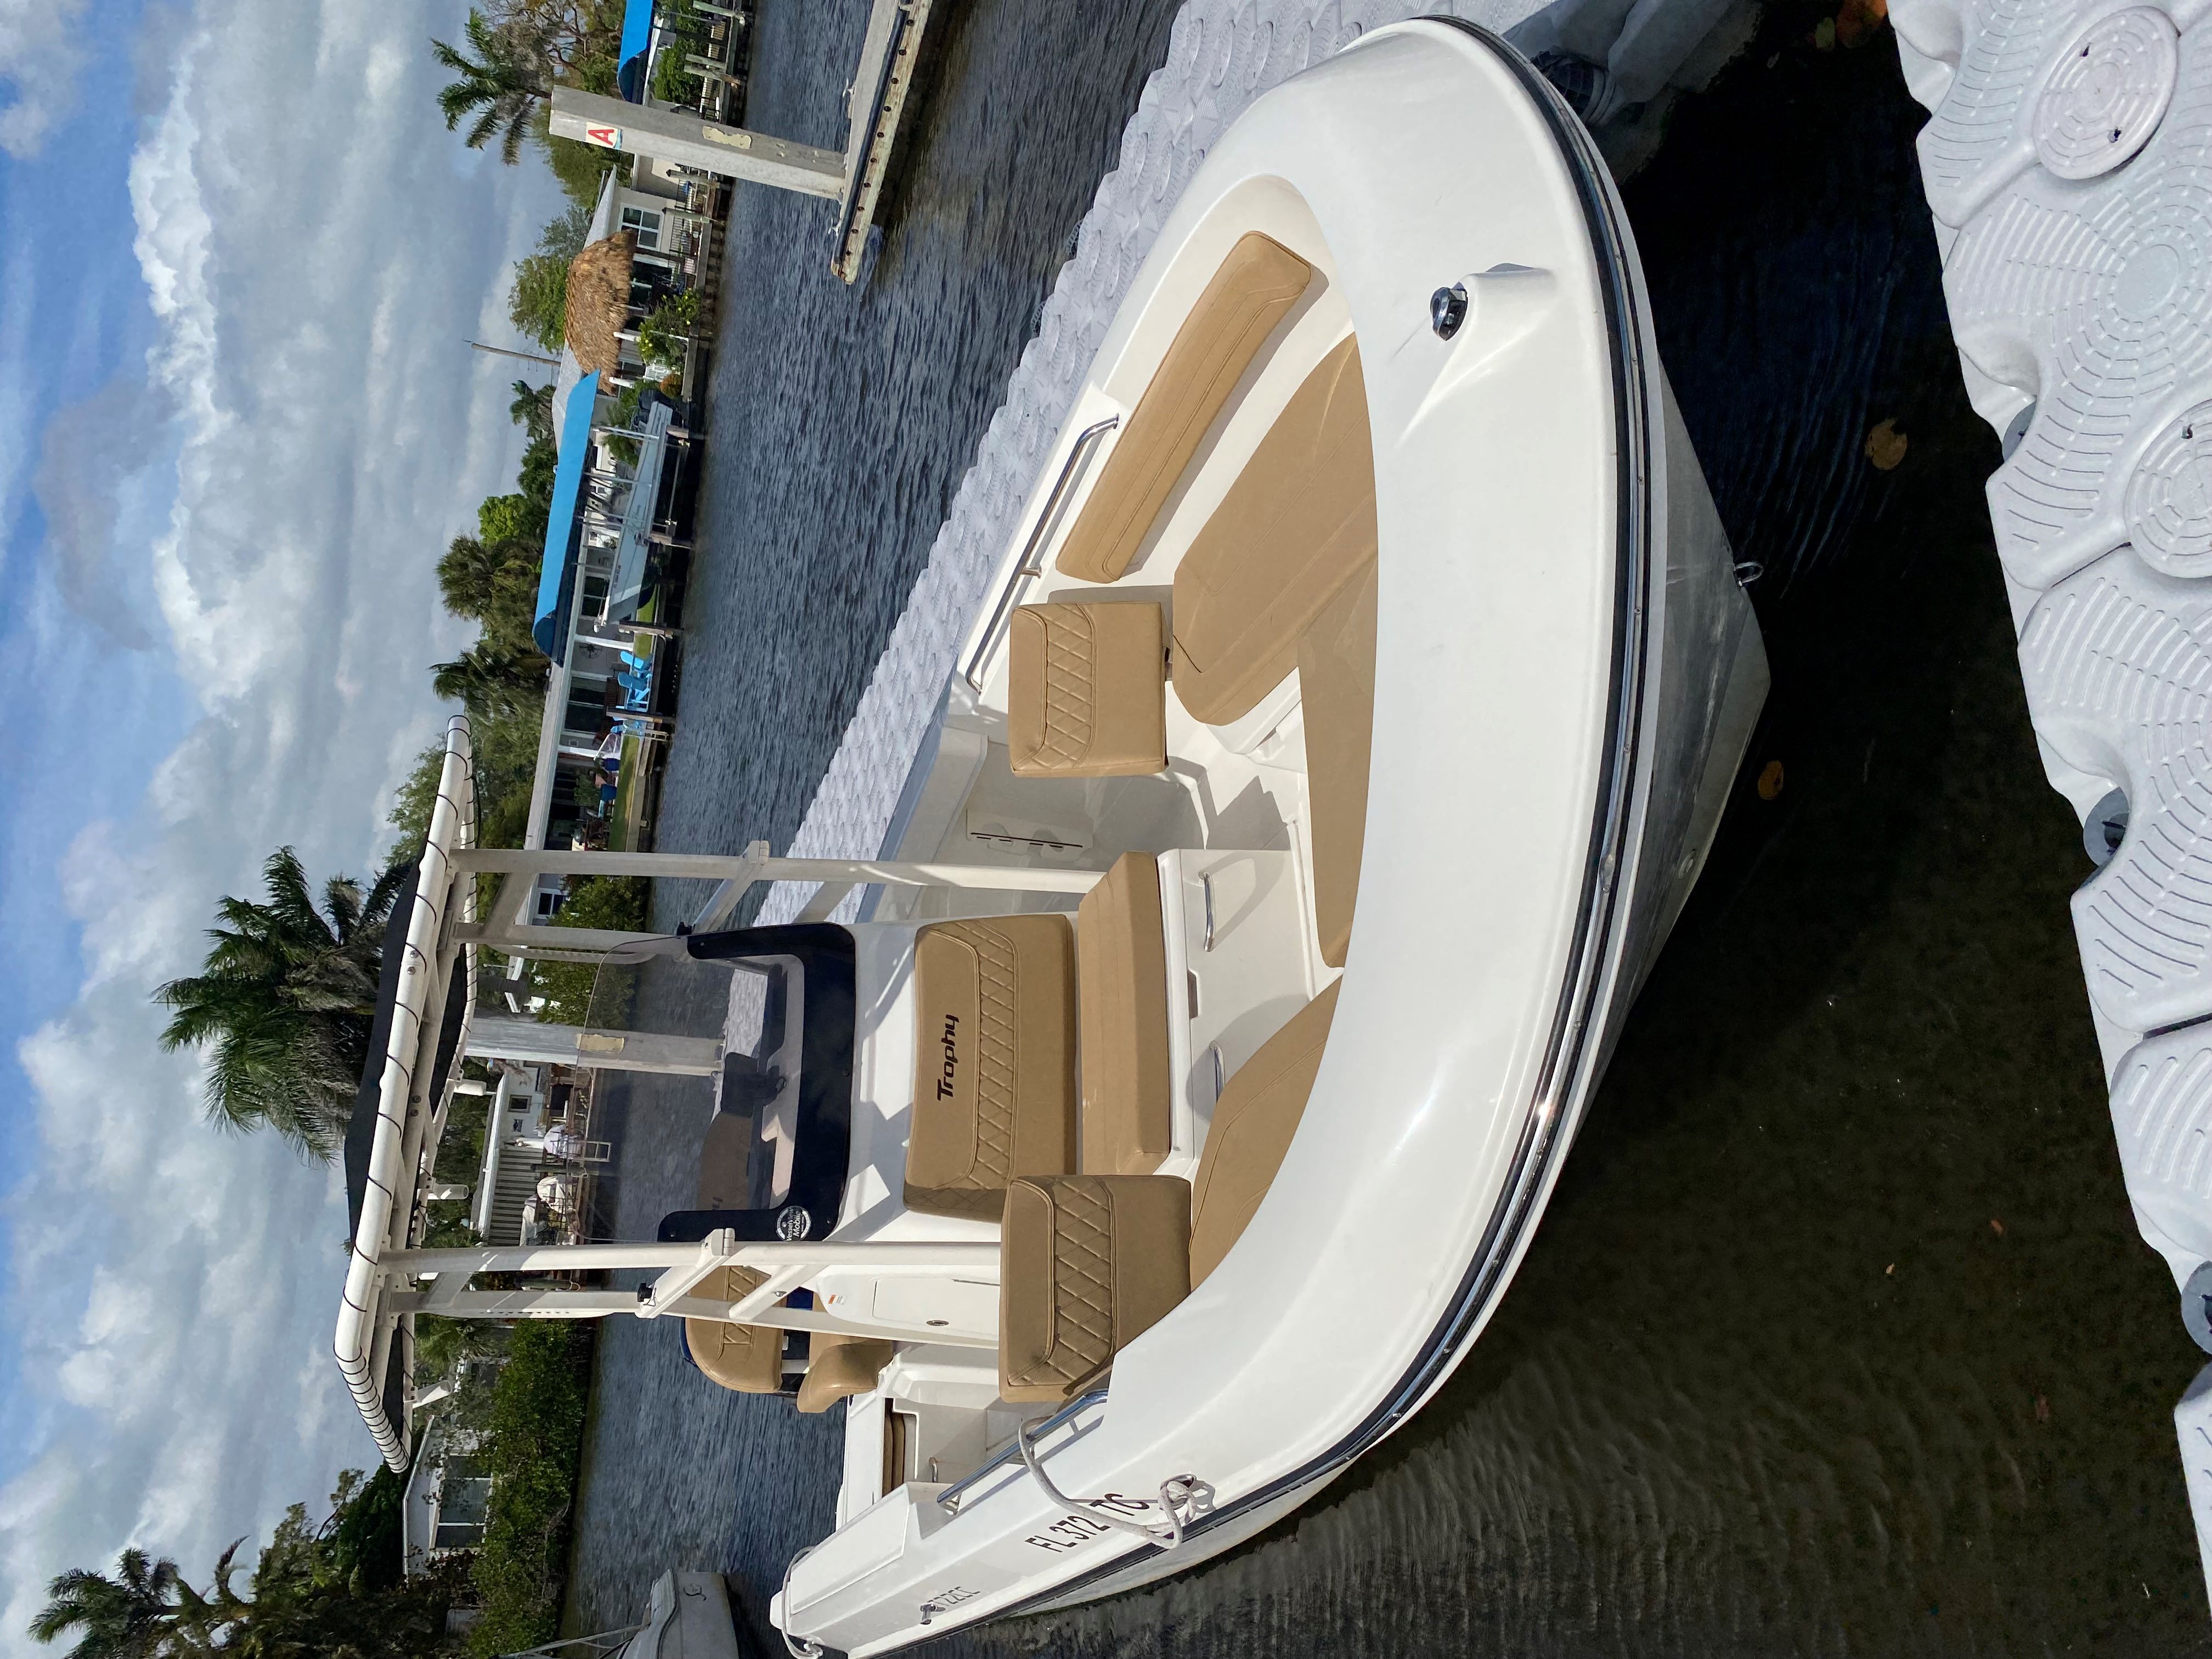 FIN-ATICAL (23FT Bayliner Trophy Center Console - 150 HP~Fishing)